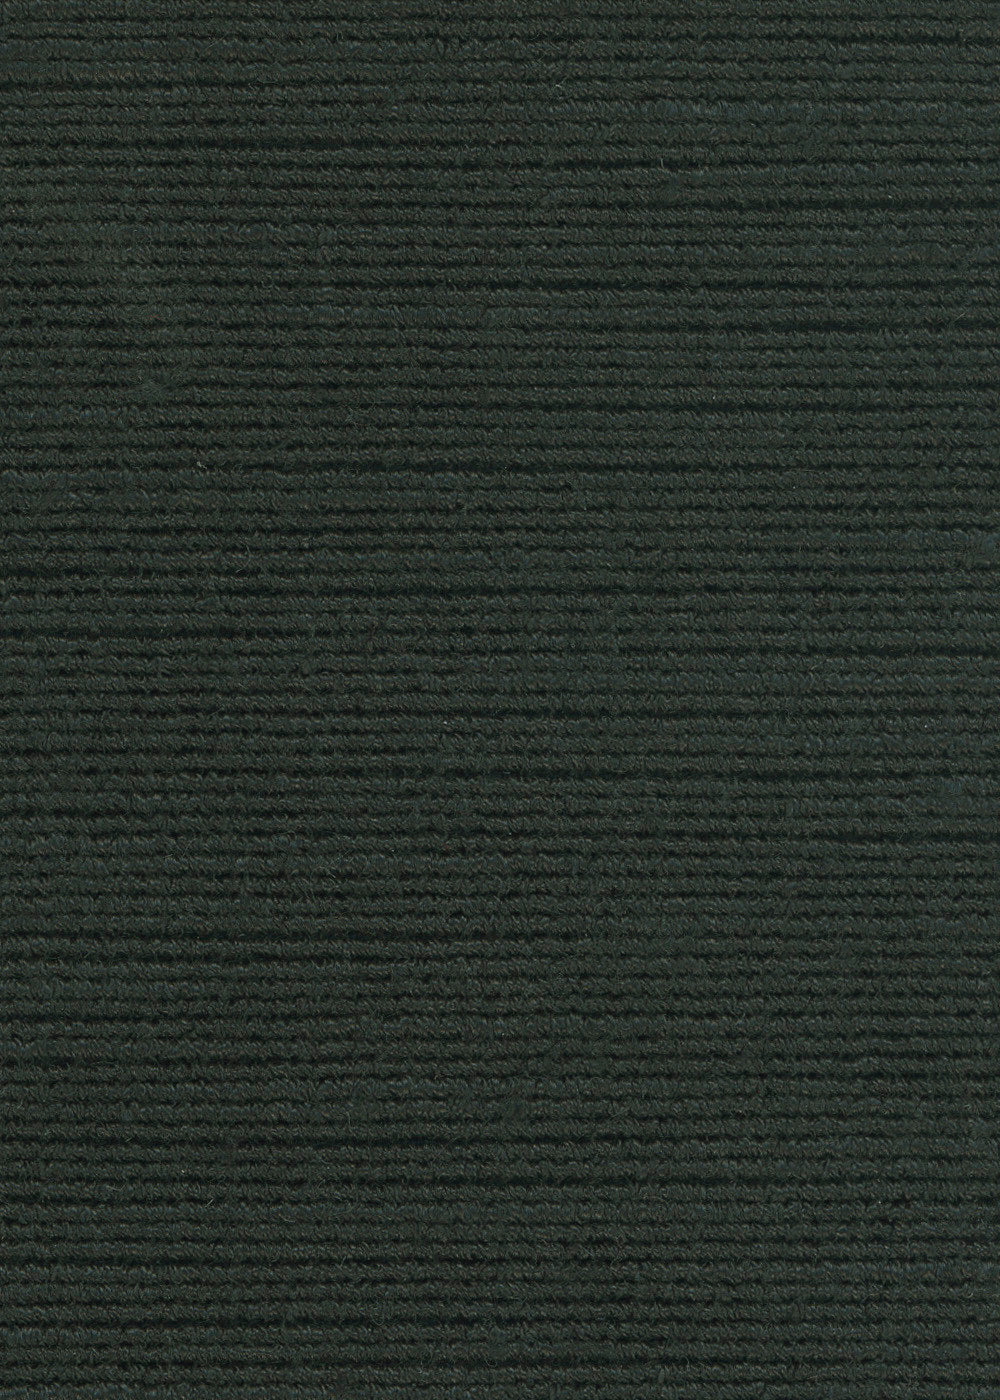 black fabric with a horizontal ribbed weave